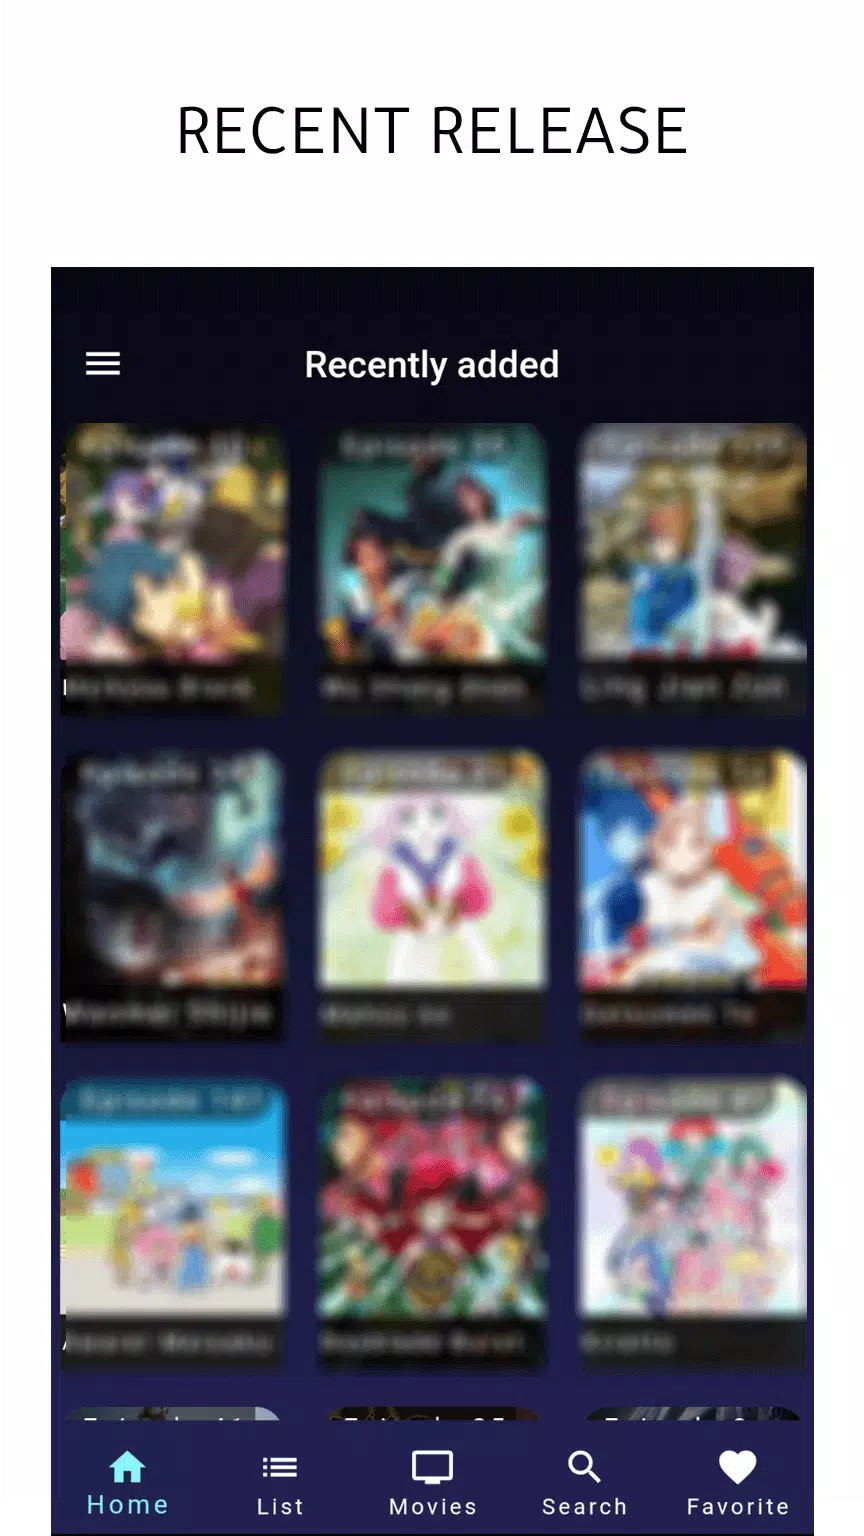 Anime HD - Watch Anime Online APK (Android App) - Free Download